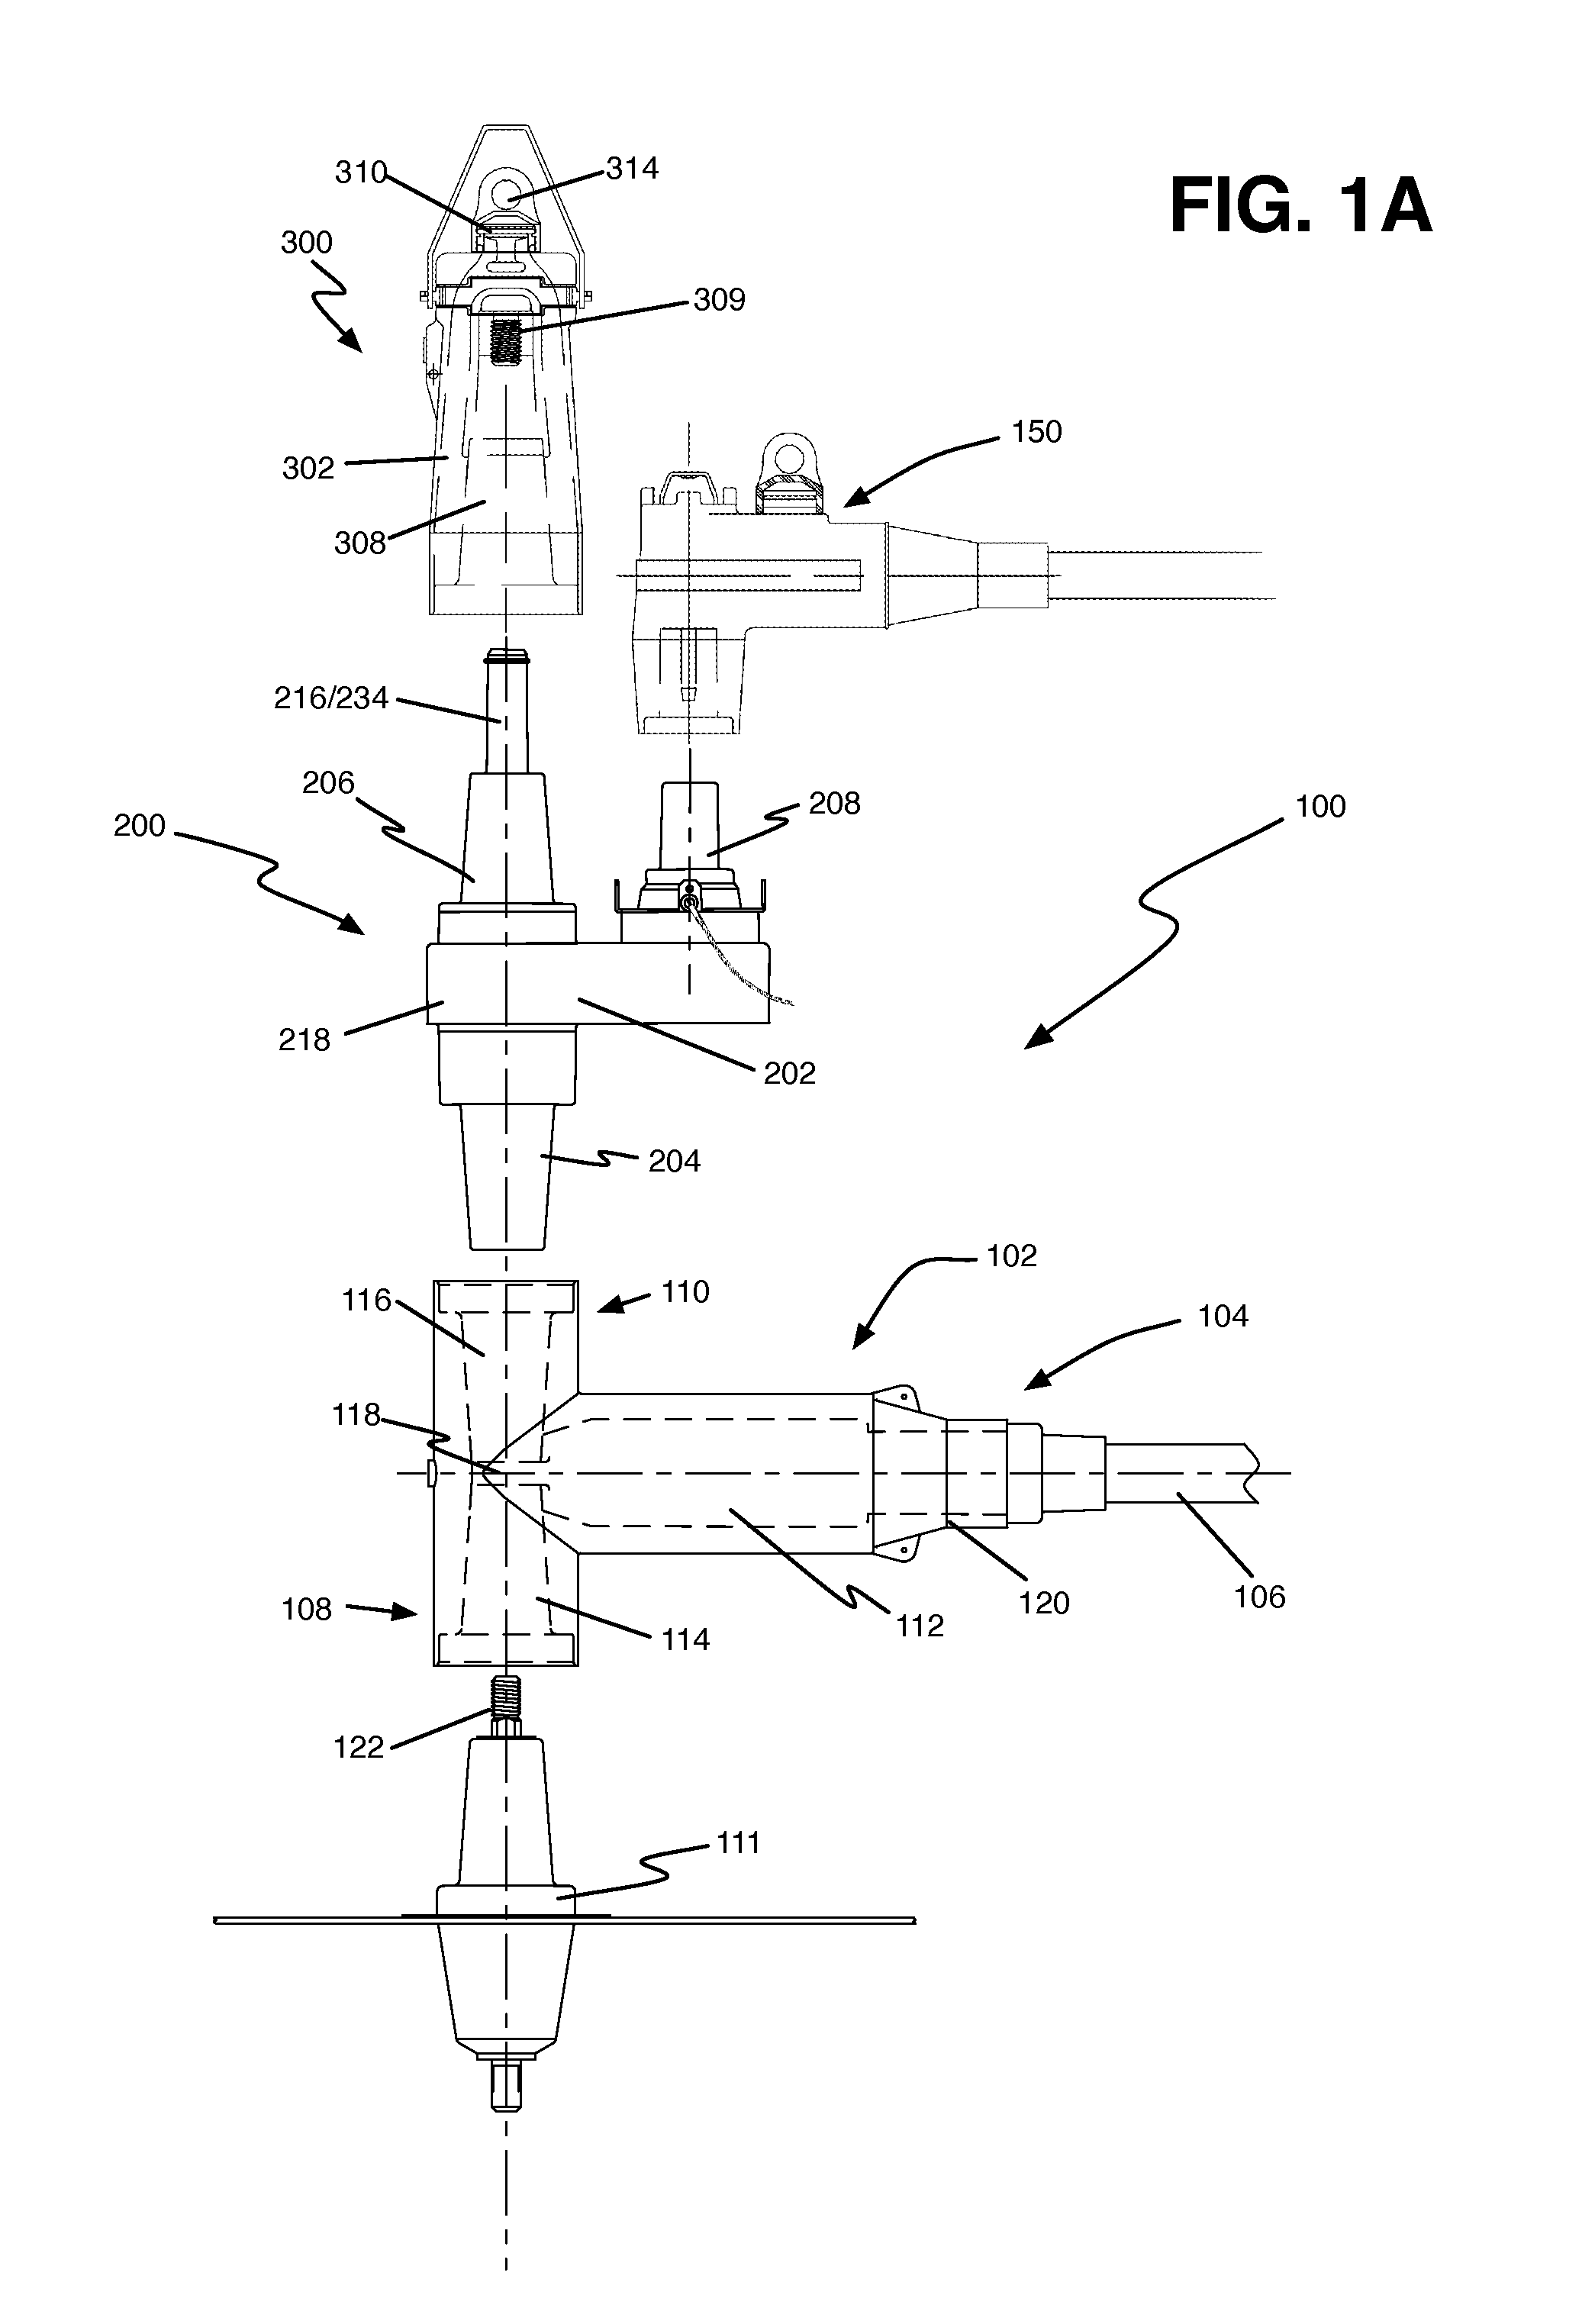 Grounding link for electrical connector mechanism